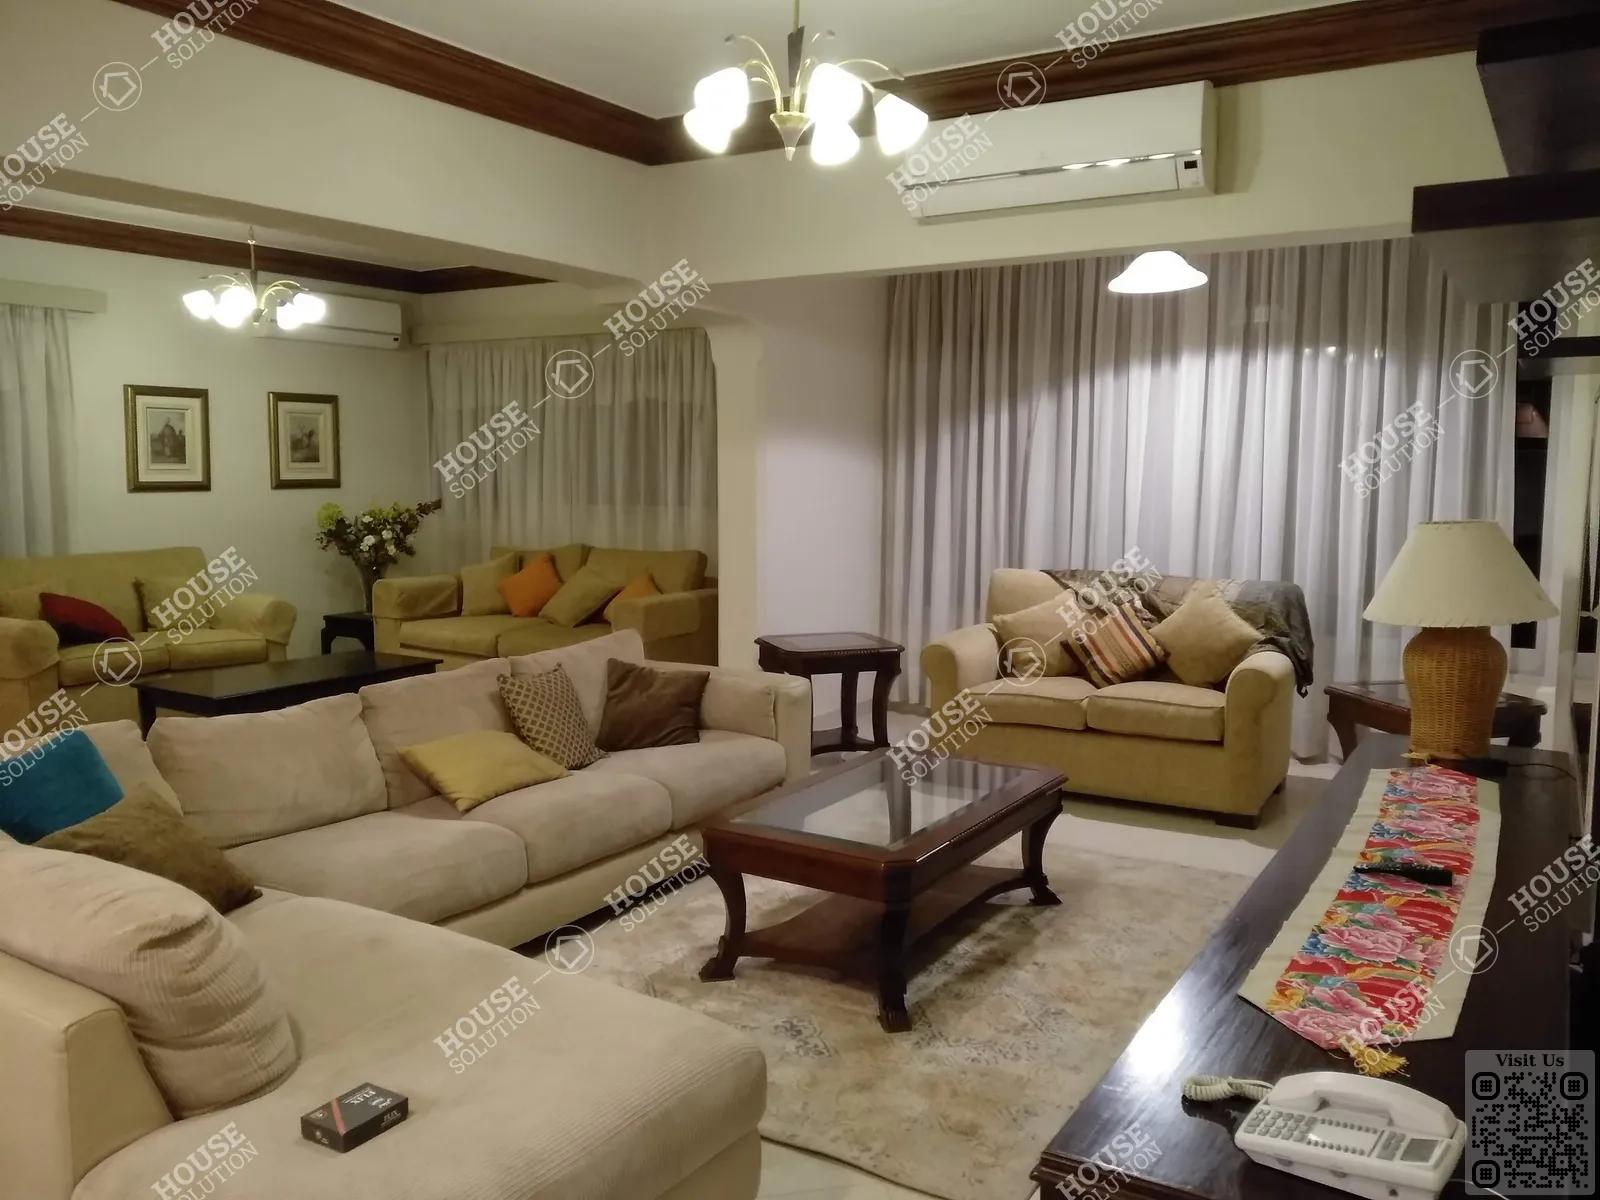 RECEPTION  @ Apartments For Rent In Maadi Maadi Sarayat Area: 185 m² consists of 3 Bedrooms 2 Bathrooms Modern furnished 5 stars #5461-0